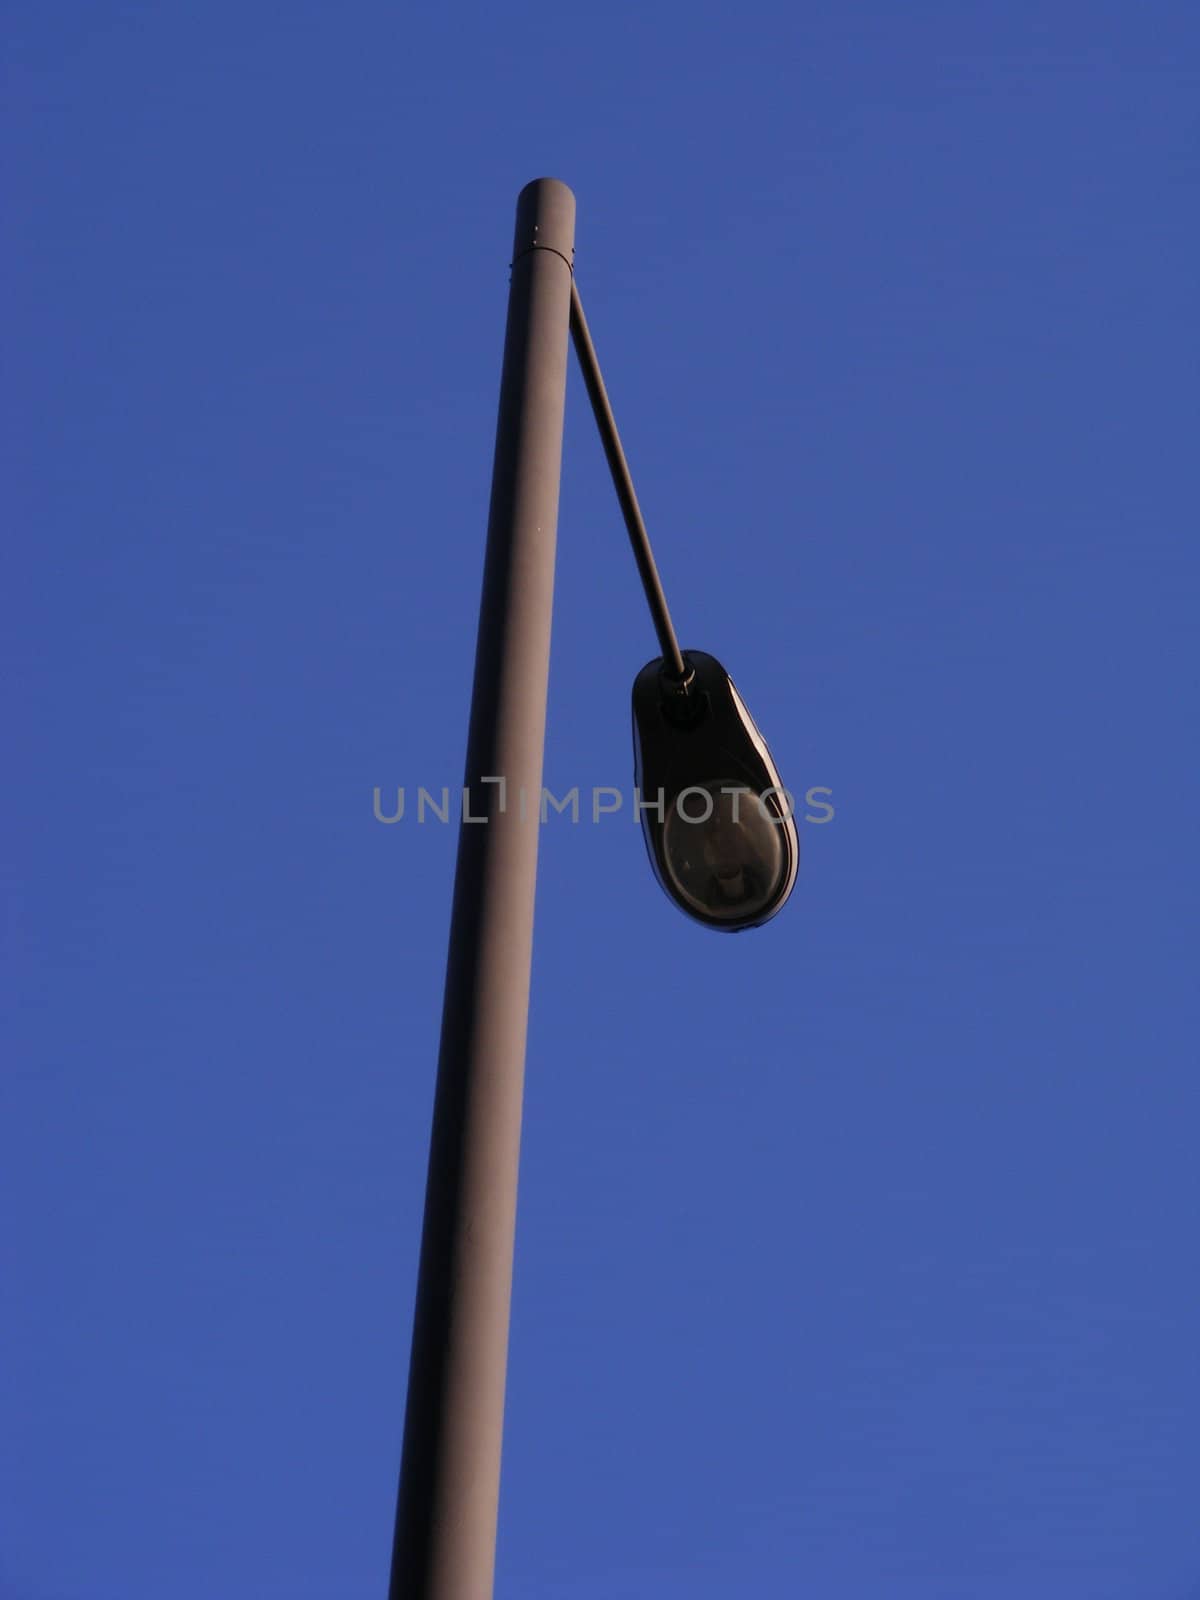 A photograph of a lamppost midday.